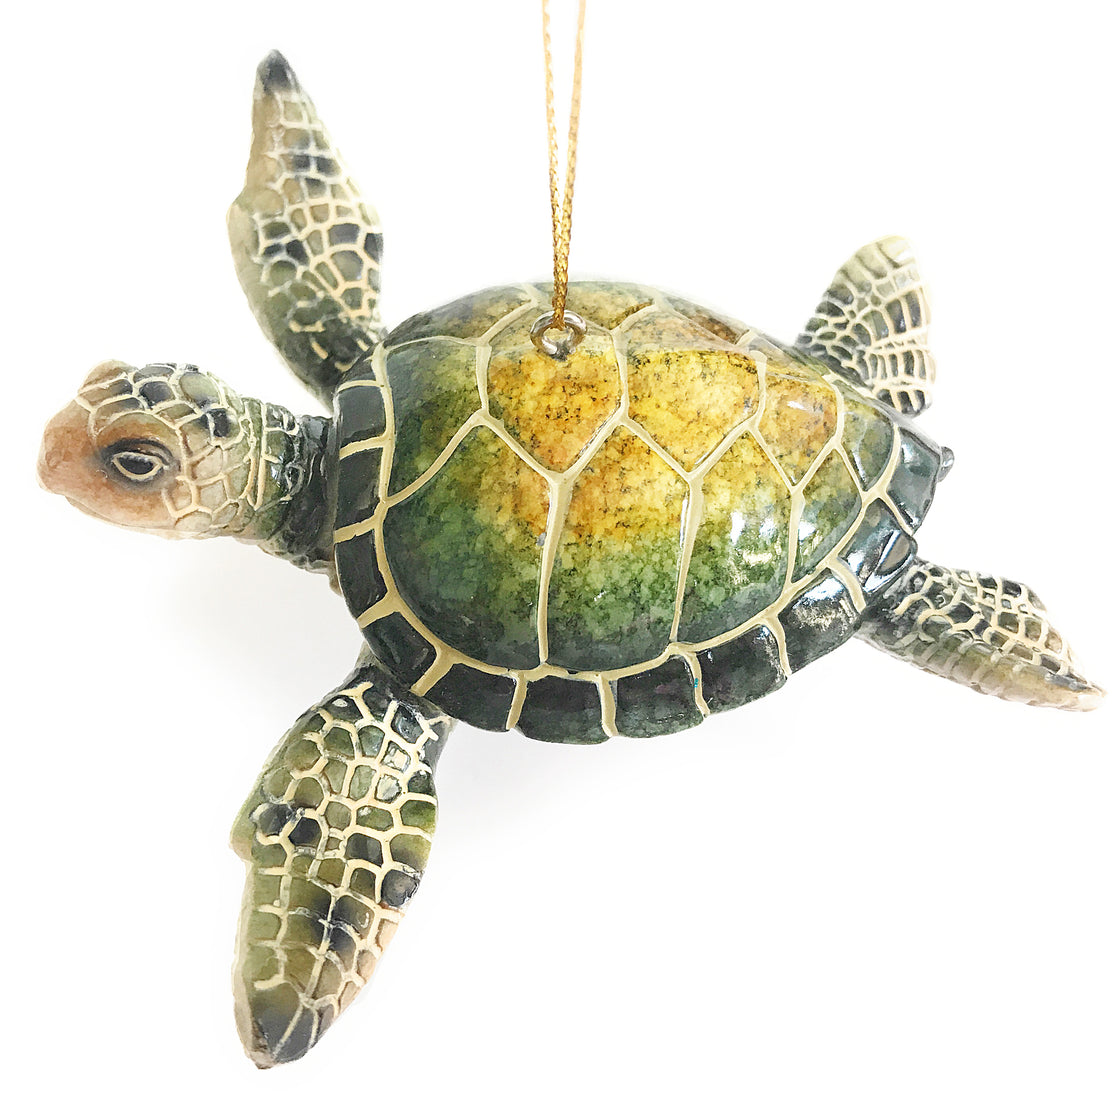 UNBOXED - Ocean-Inspired Keepsake Ornament Collection at 40% Off!